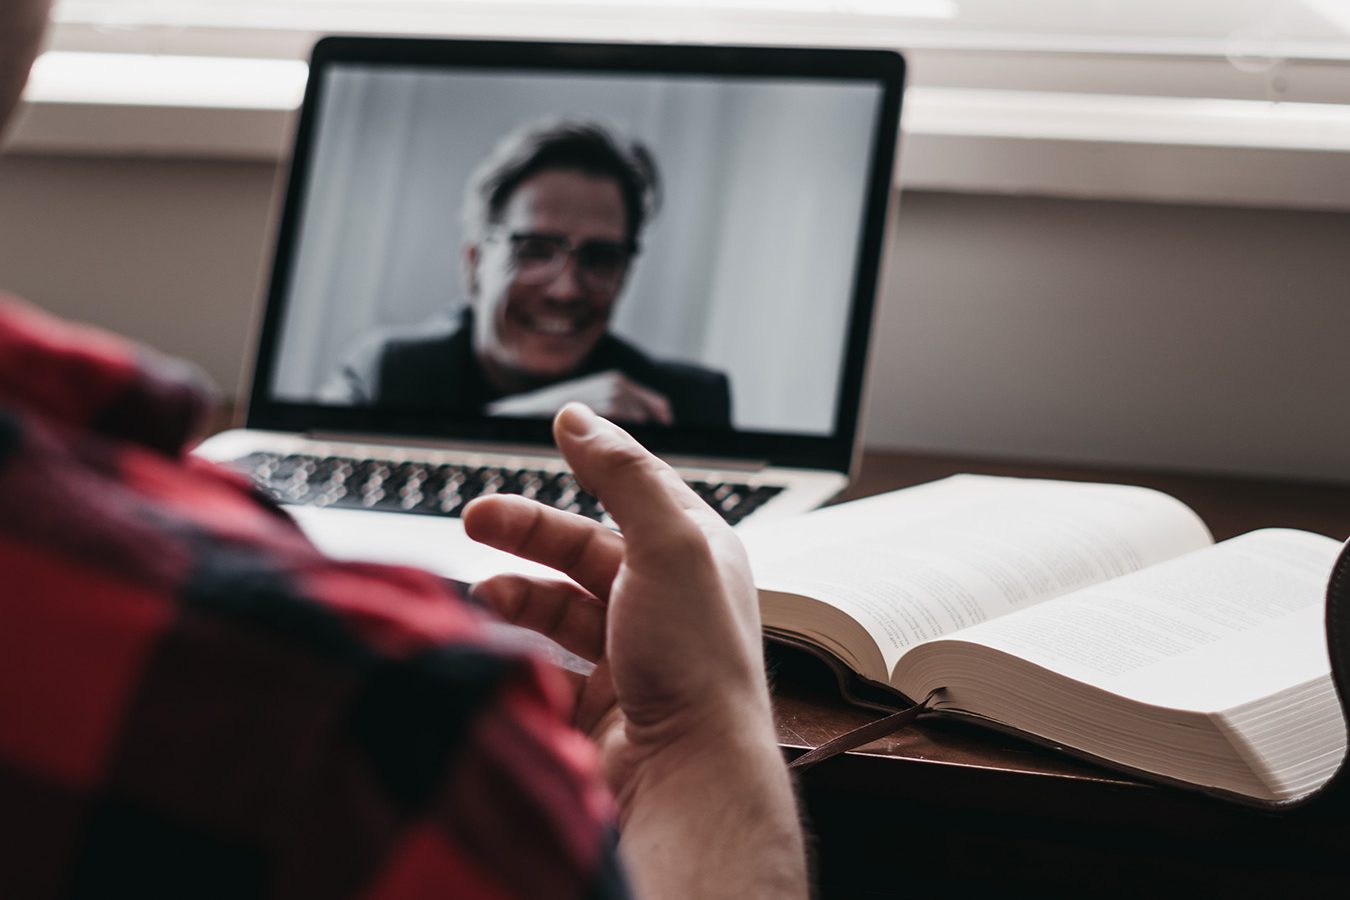 An image capturing a man engaged in a video call with a client, shown from behind.